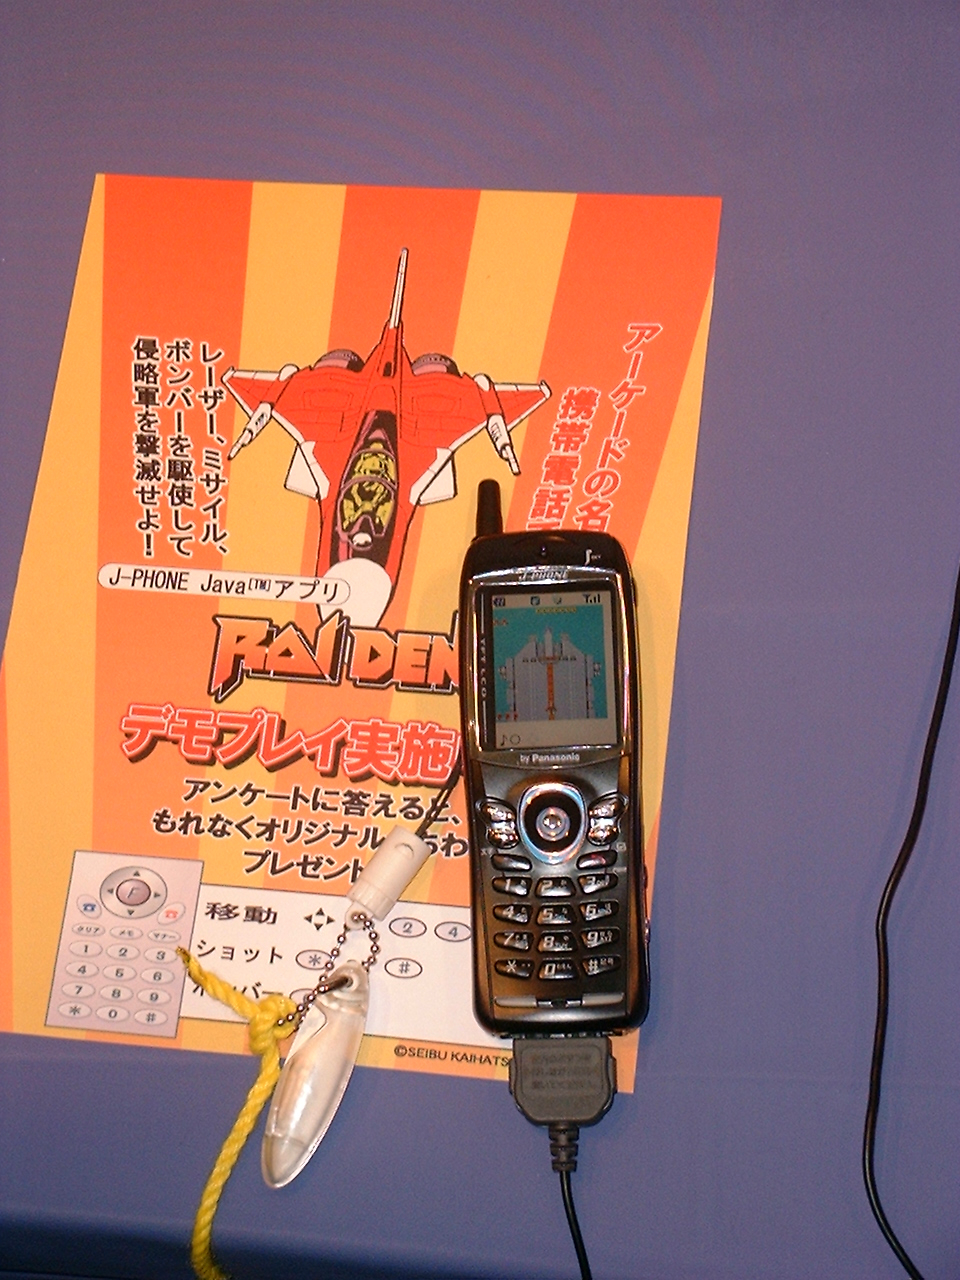 a mobile phone on a counter near an image of a plane with the raiden logo